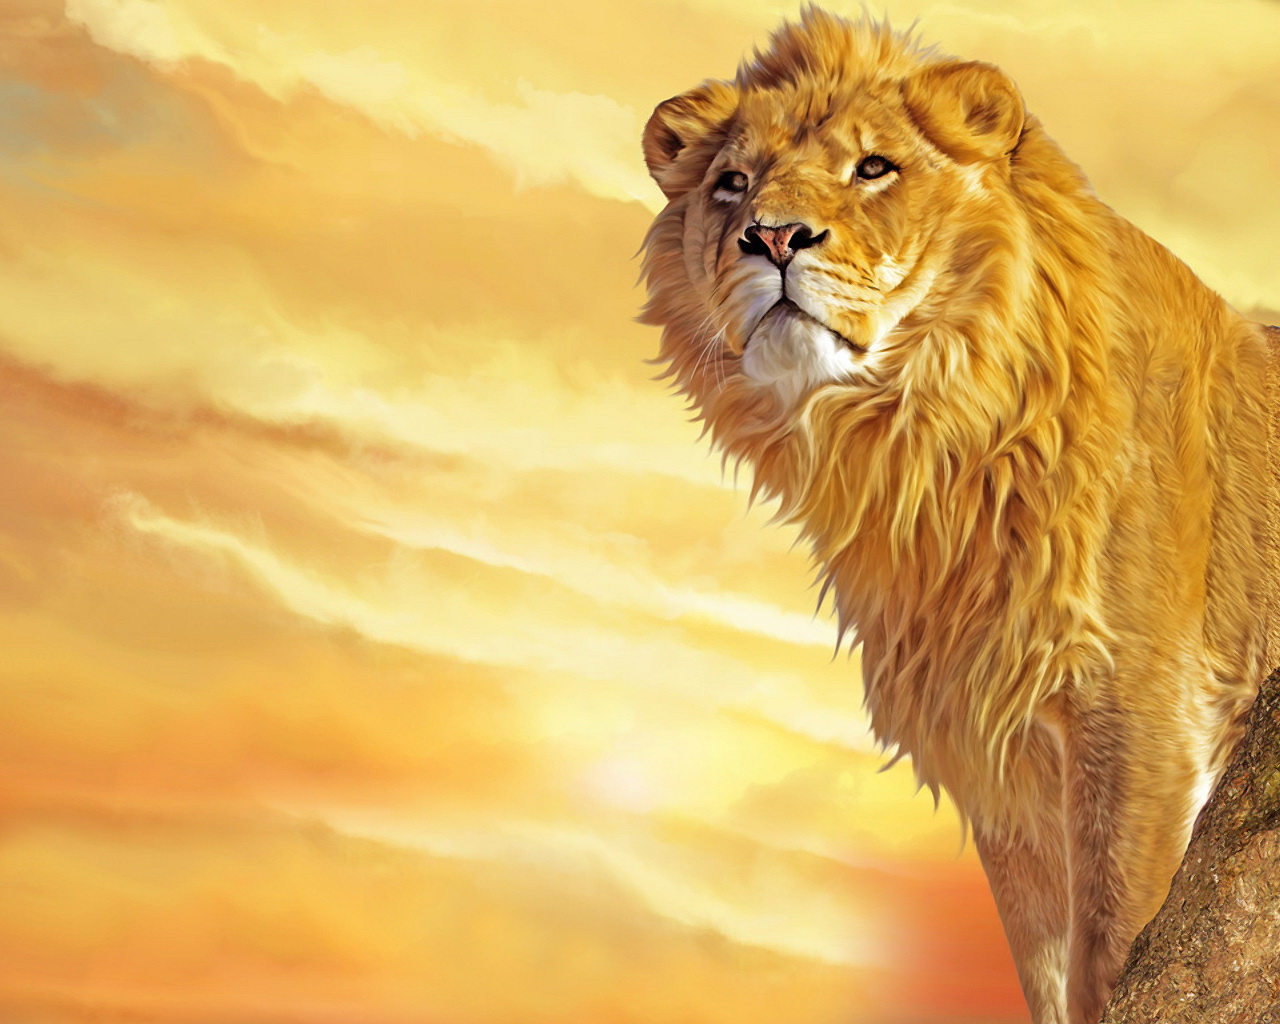 Lion HD Wallpaper African Lions Pictures Animal Photo